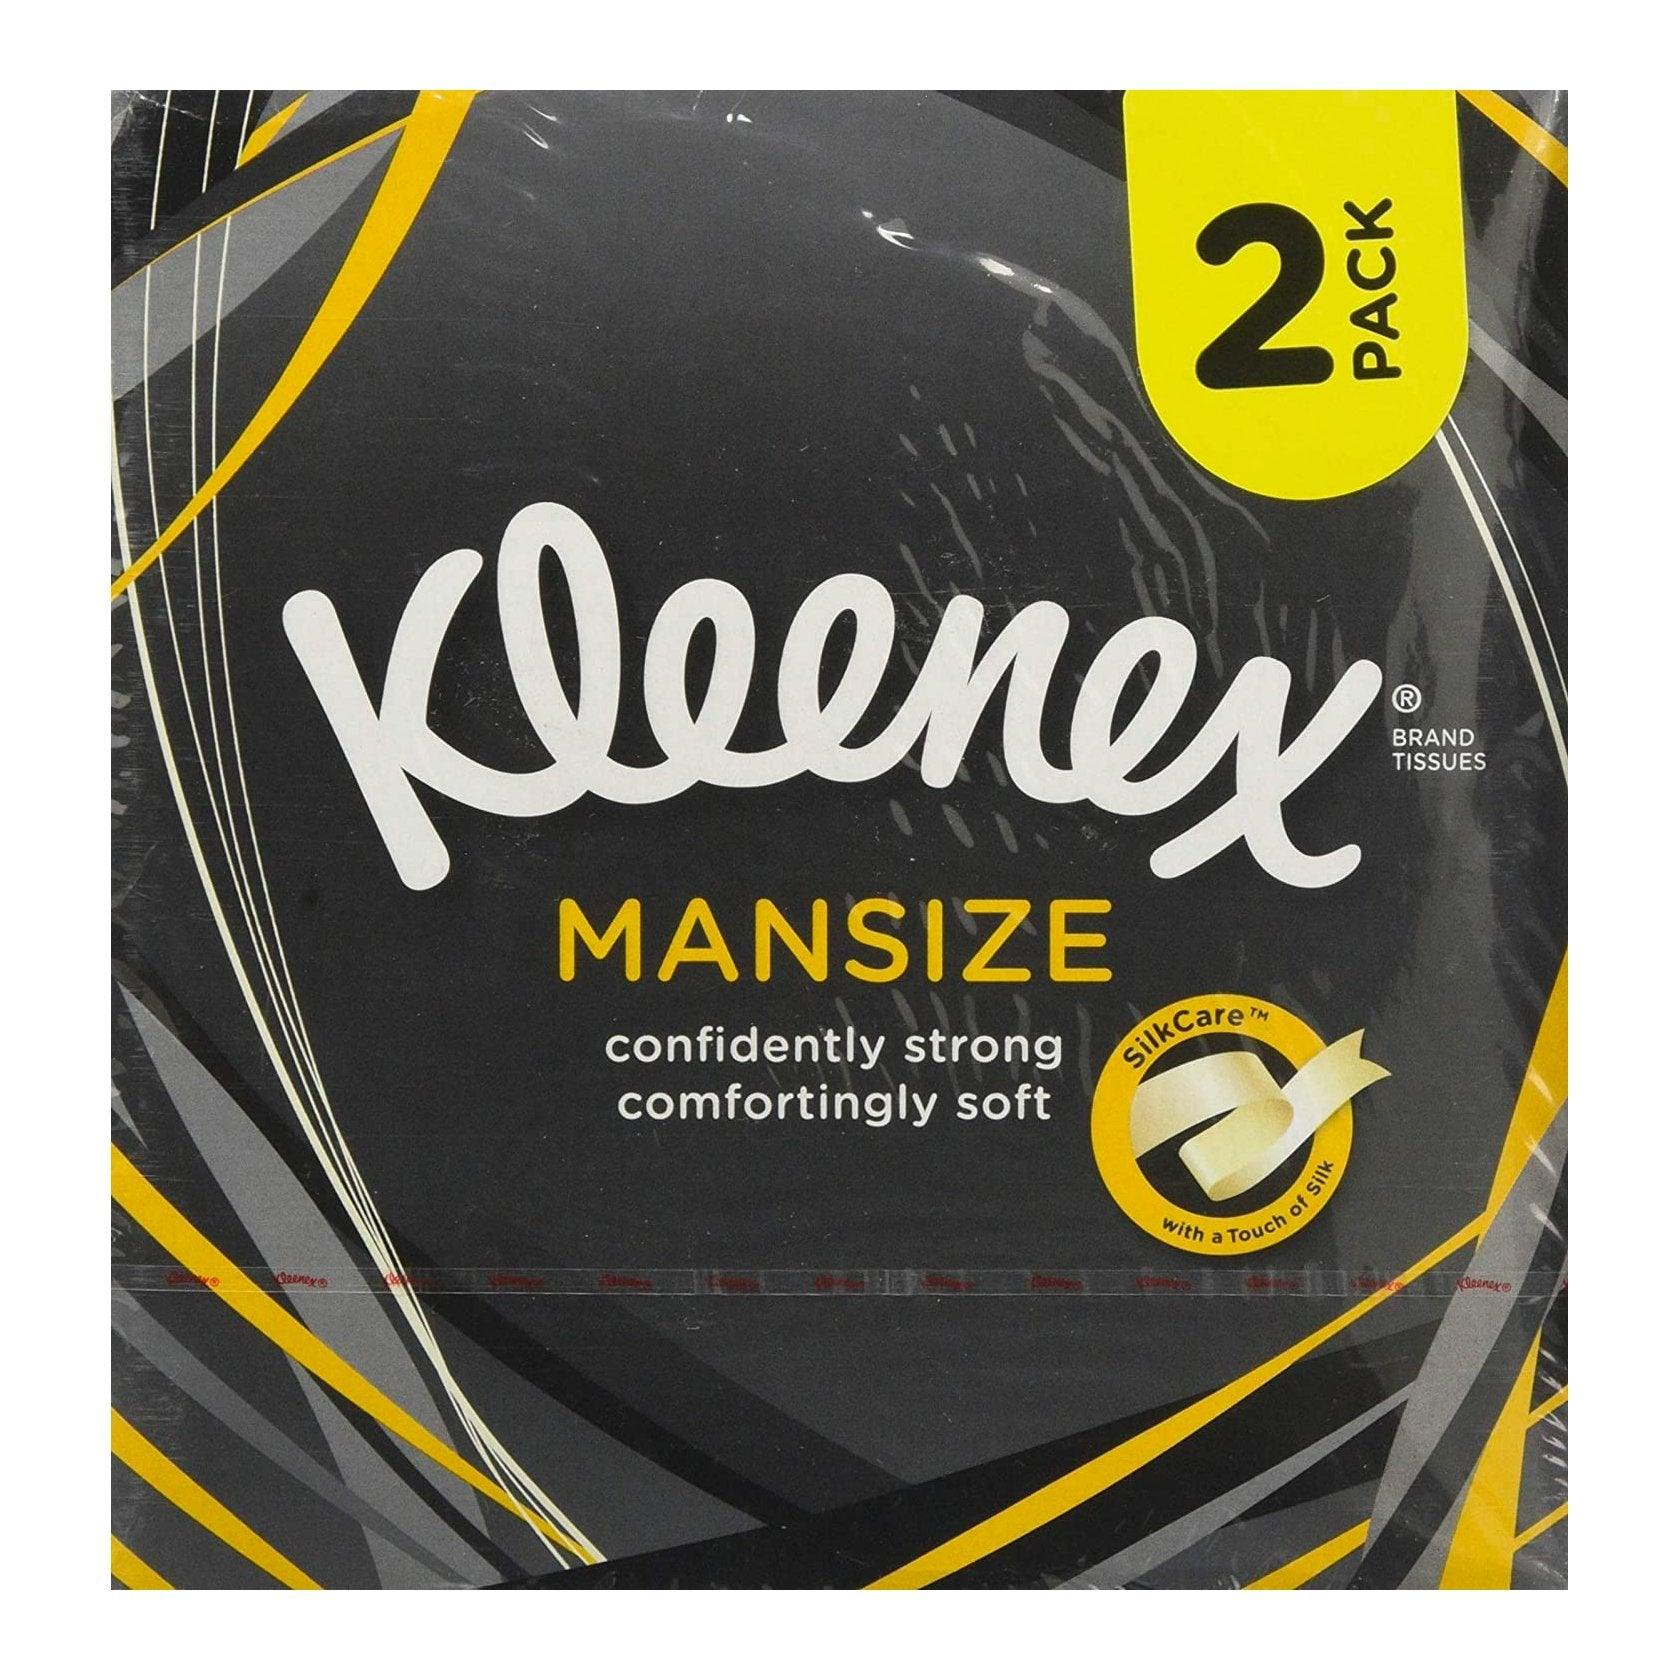 Kleenex Compact Box Extra Large Tissues - 2 pack - Vending Superstore